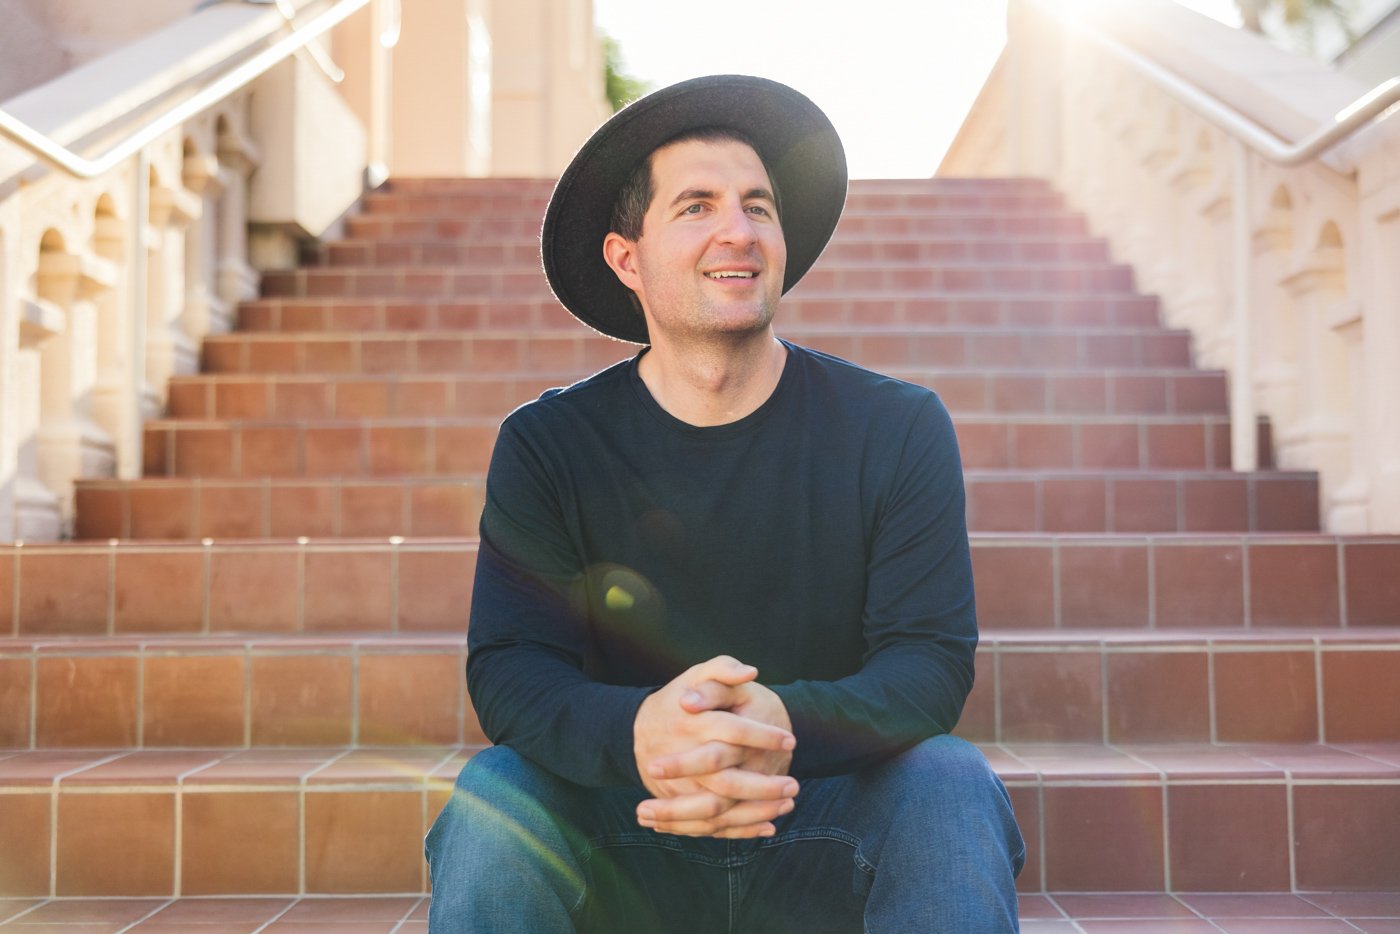 man wearing hat sits on steps and smiles while sun flares in